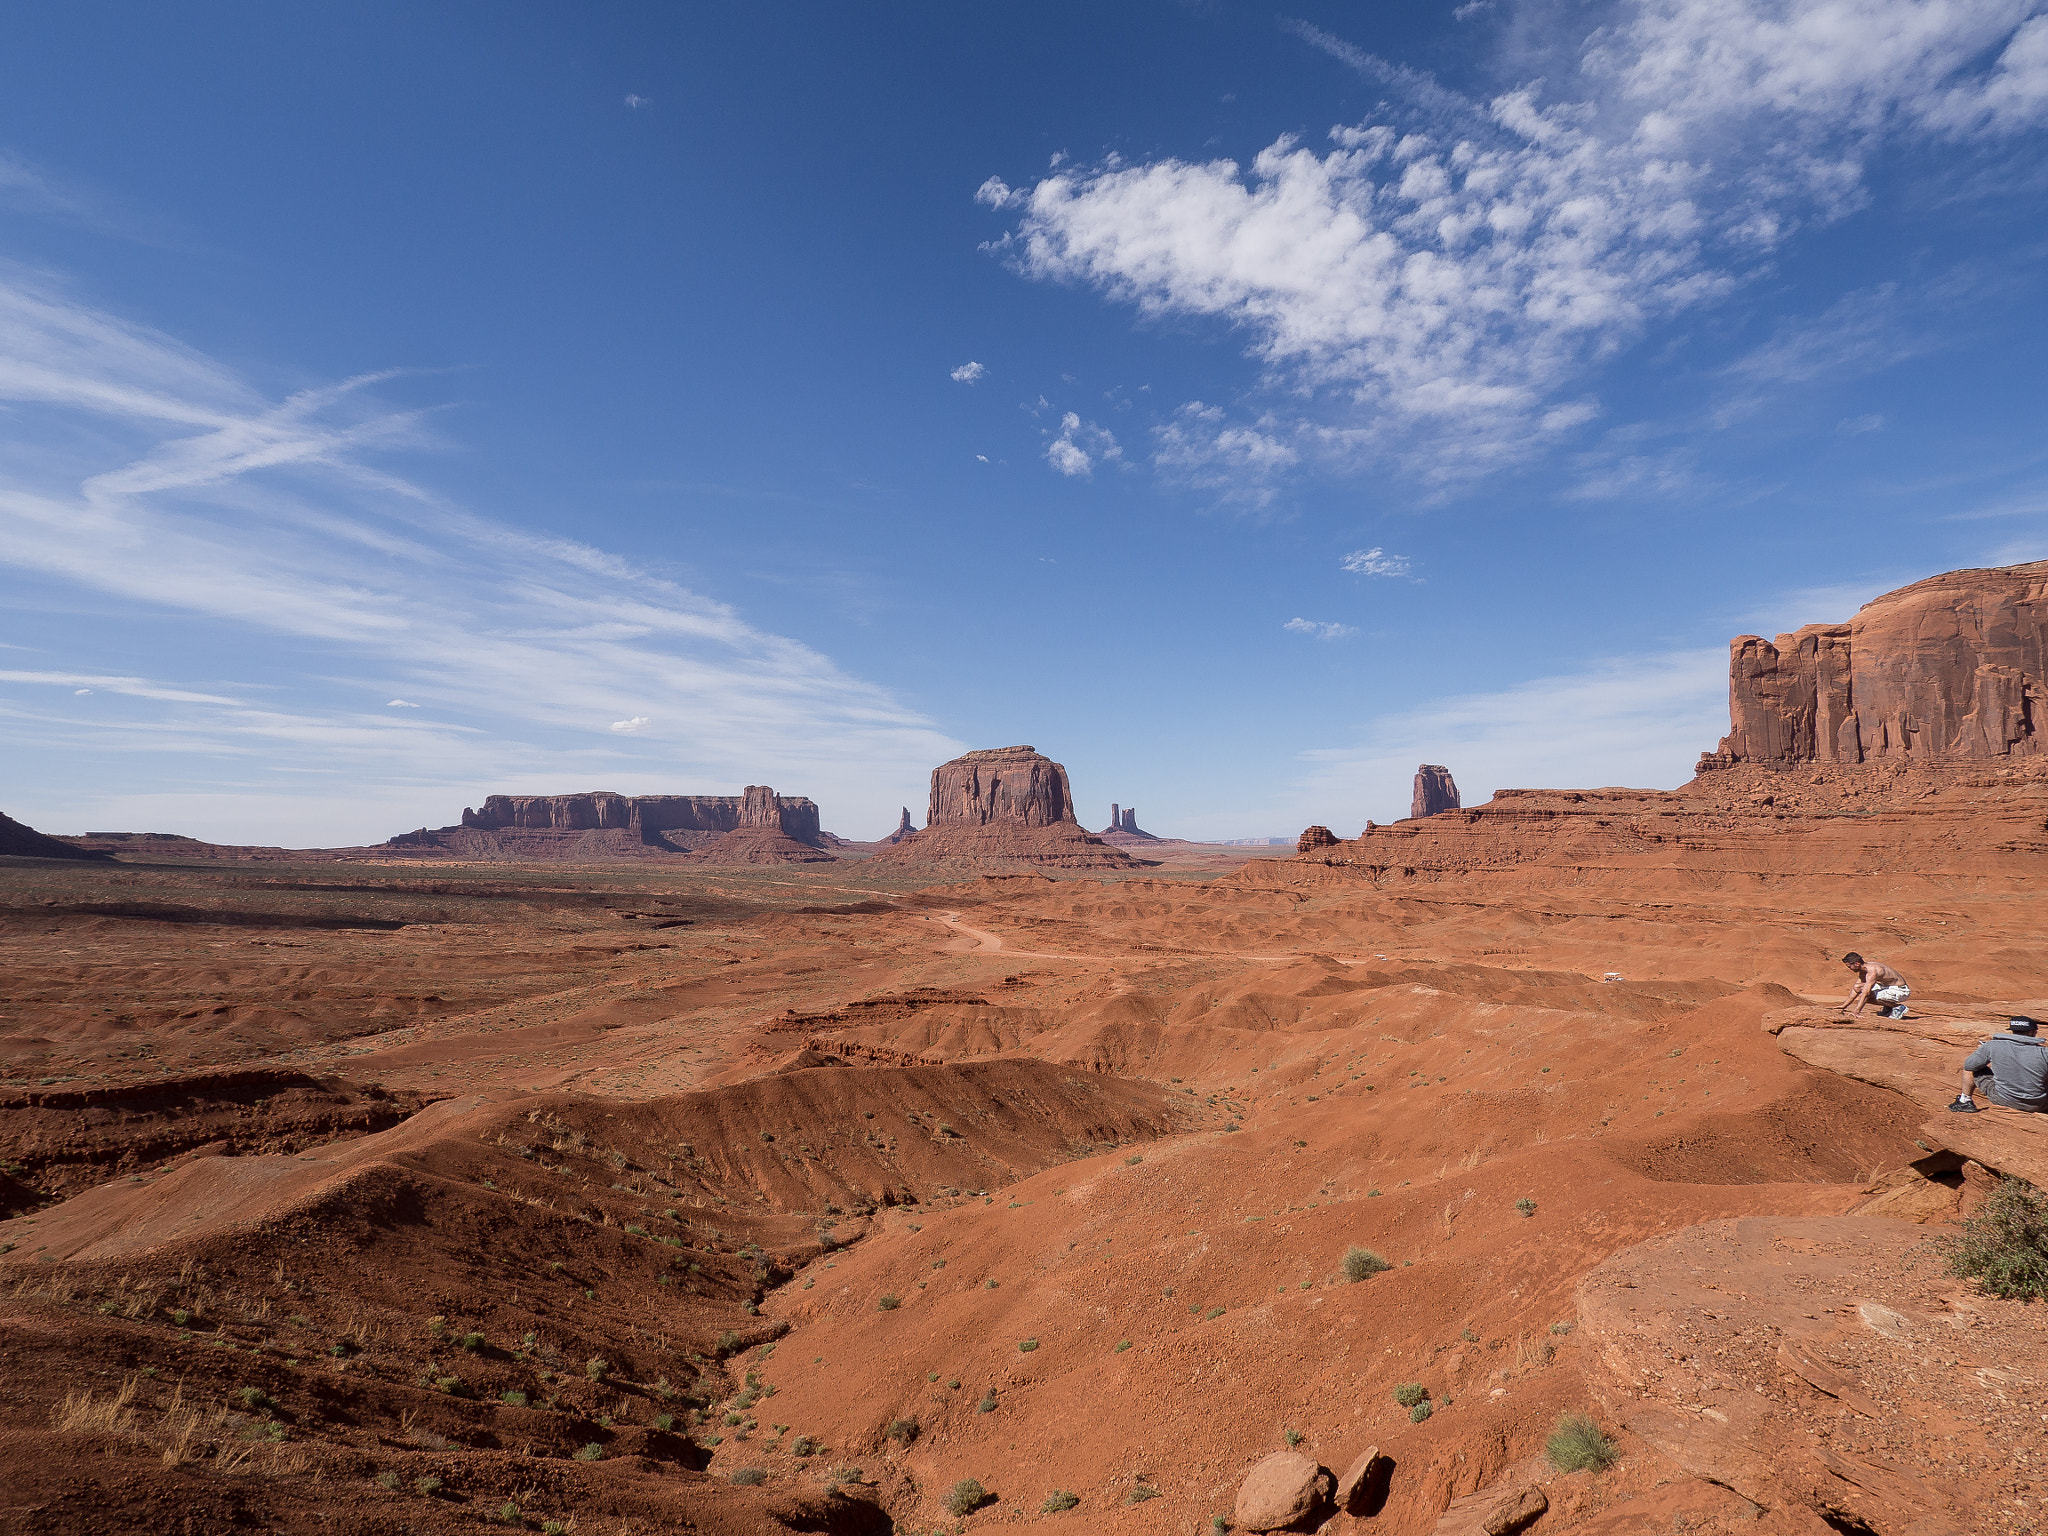 Olympus OM-D E-M10 sample photo. Monument valley photography